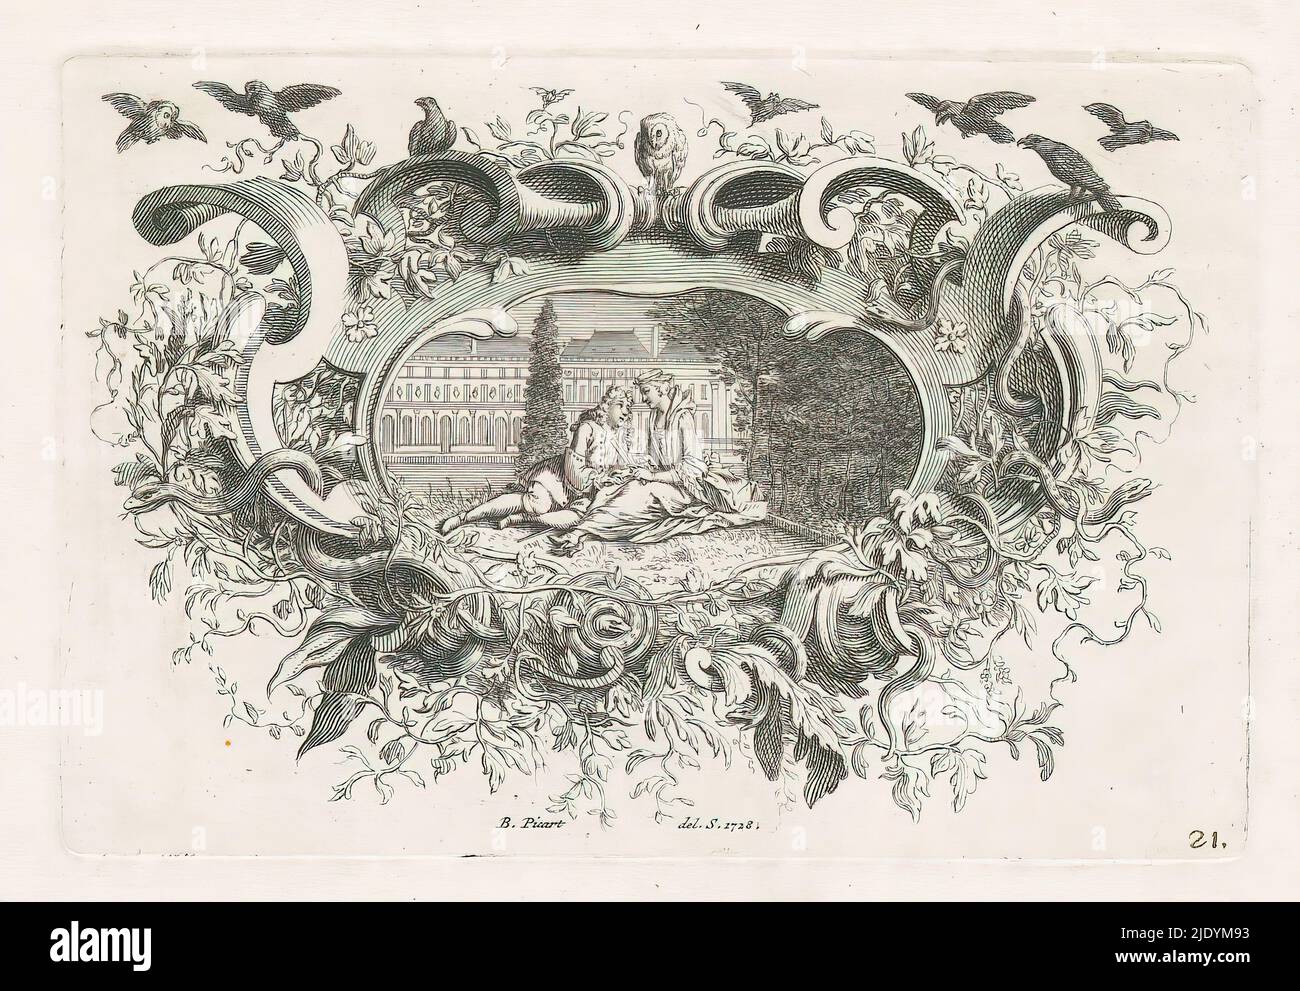 Love couple in garden, A couple in love is sitting together in a garden. In the background a palace. The scene is framed in an ornamental frame with birds at the top, including owls., print maker: Bernard Picart, (mentioned on object), after drawing by: Bernard Picart, (mentioned on object), Amsterdam, 1728, paper, etching, engraving, width 89 mm × height 132 mm Stock Photo